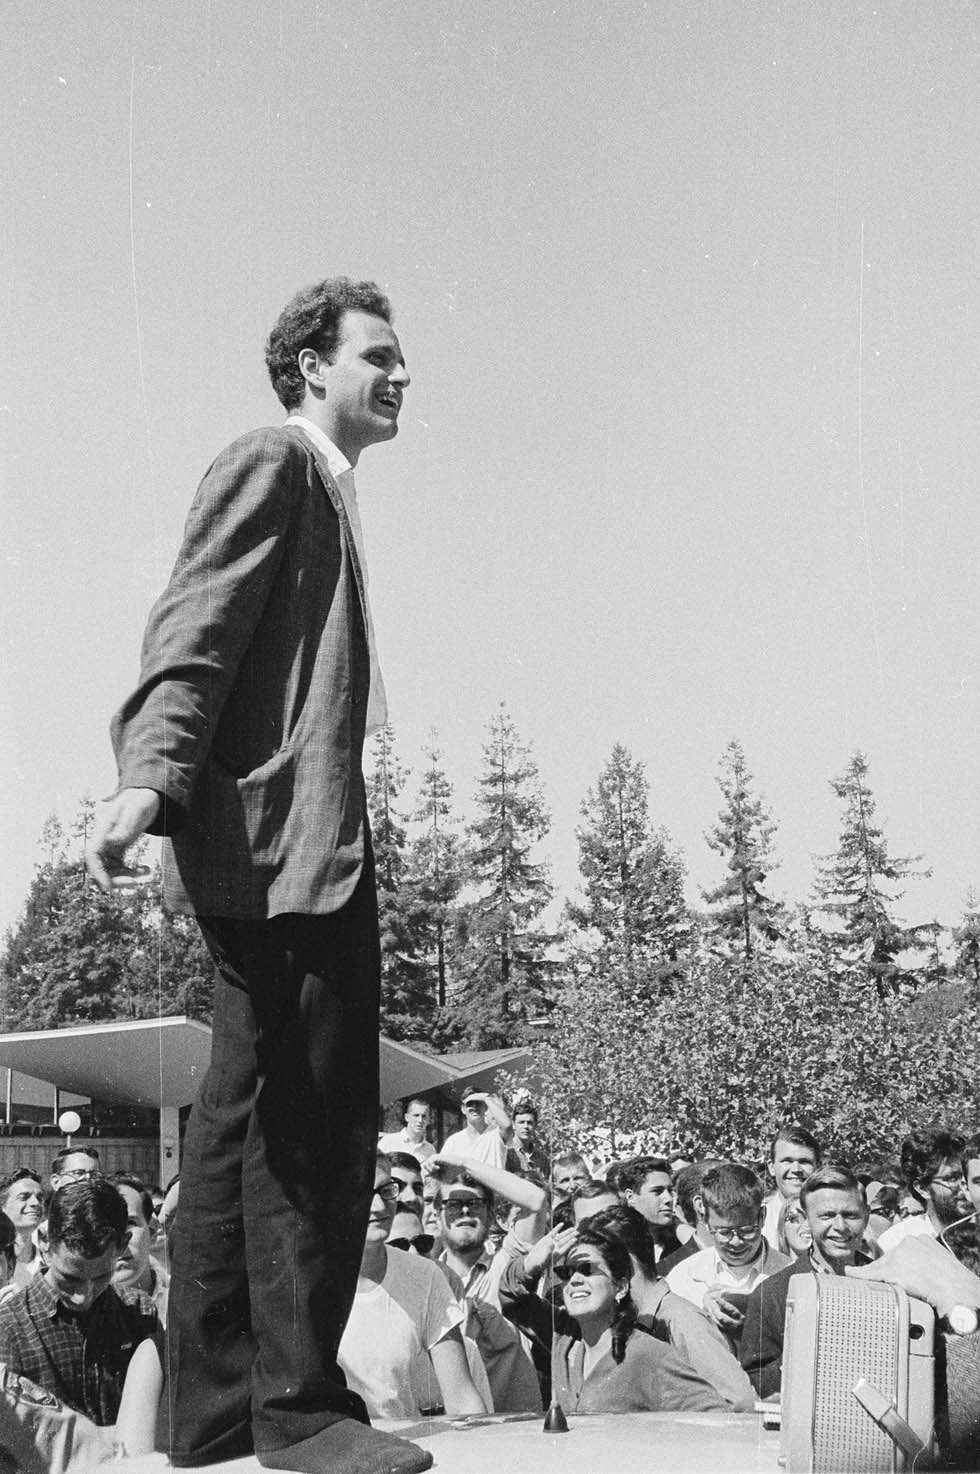 Mario Savio (in socks) speaking from top of police car by Steven Marcus